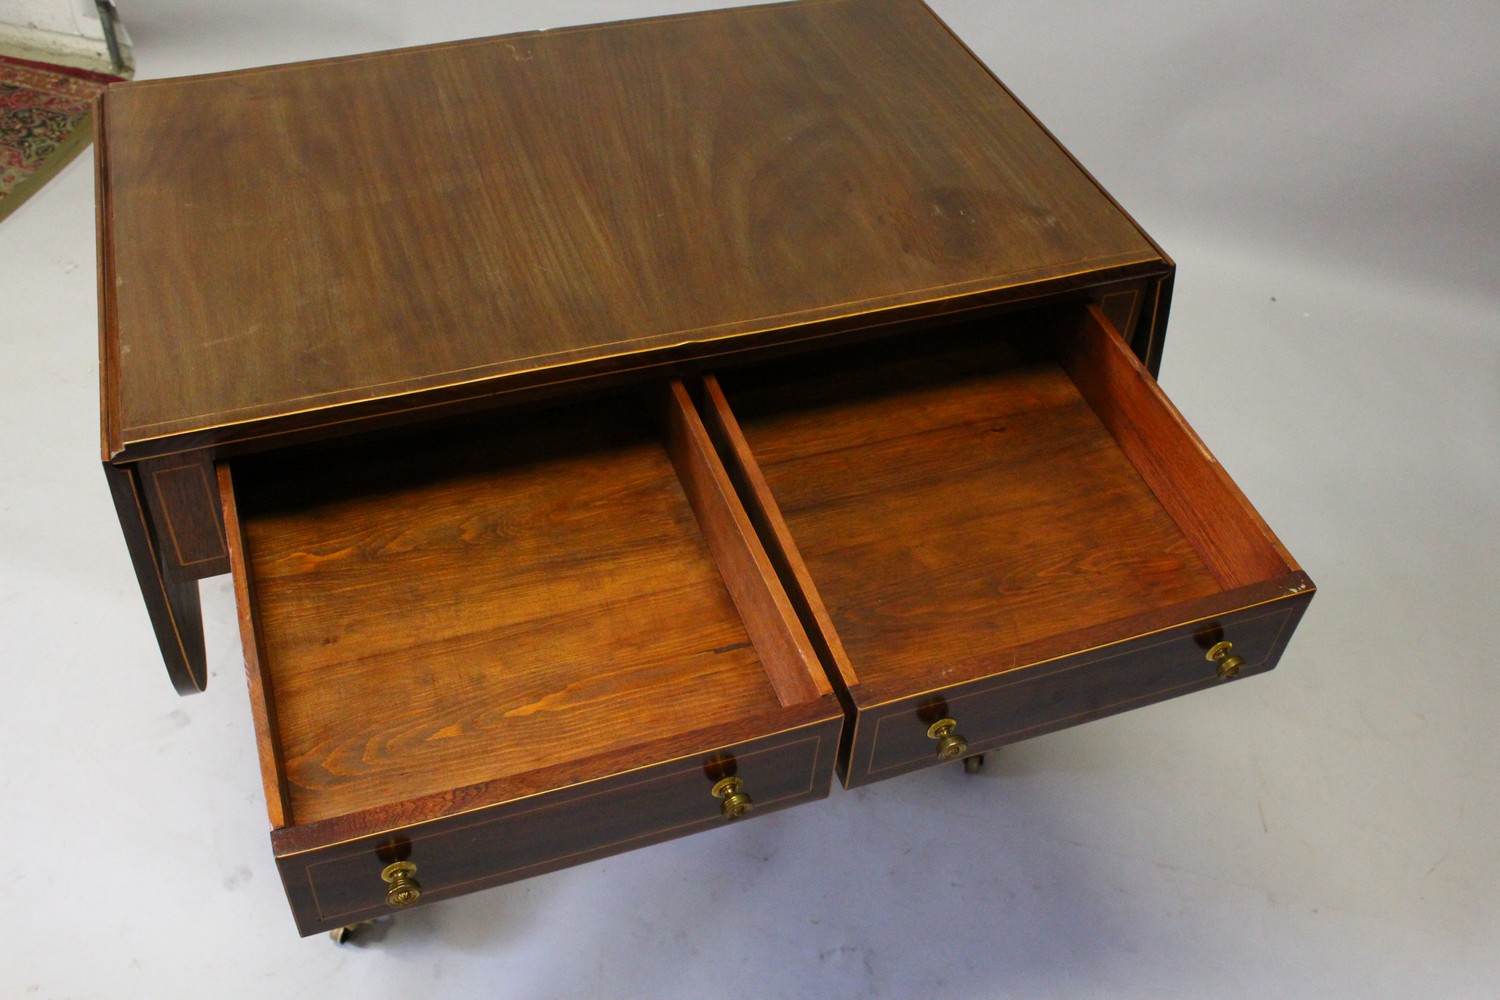 A GEORGIAN STYLE MAHOGANY INLAID SOFA TABLE, with folding flap, two small drawers, on end supports - Image 6 of 11